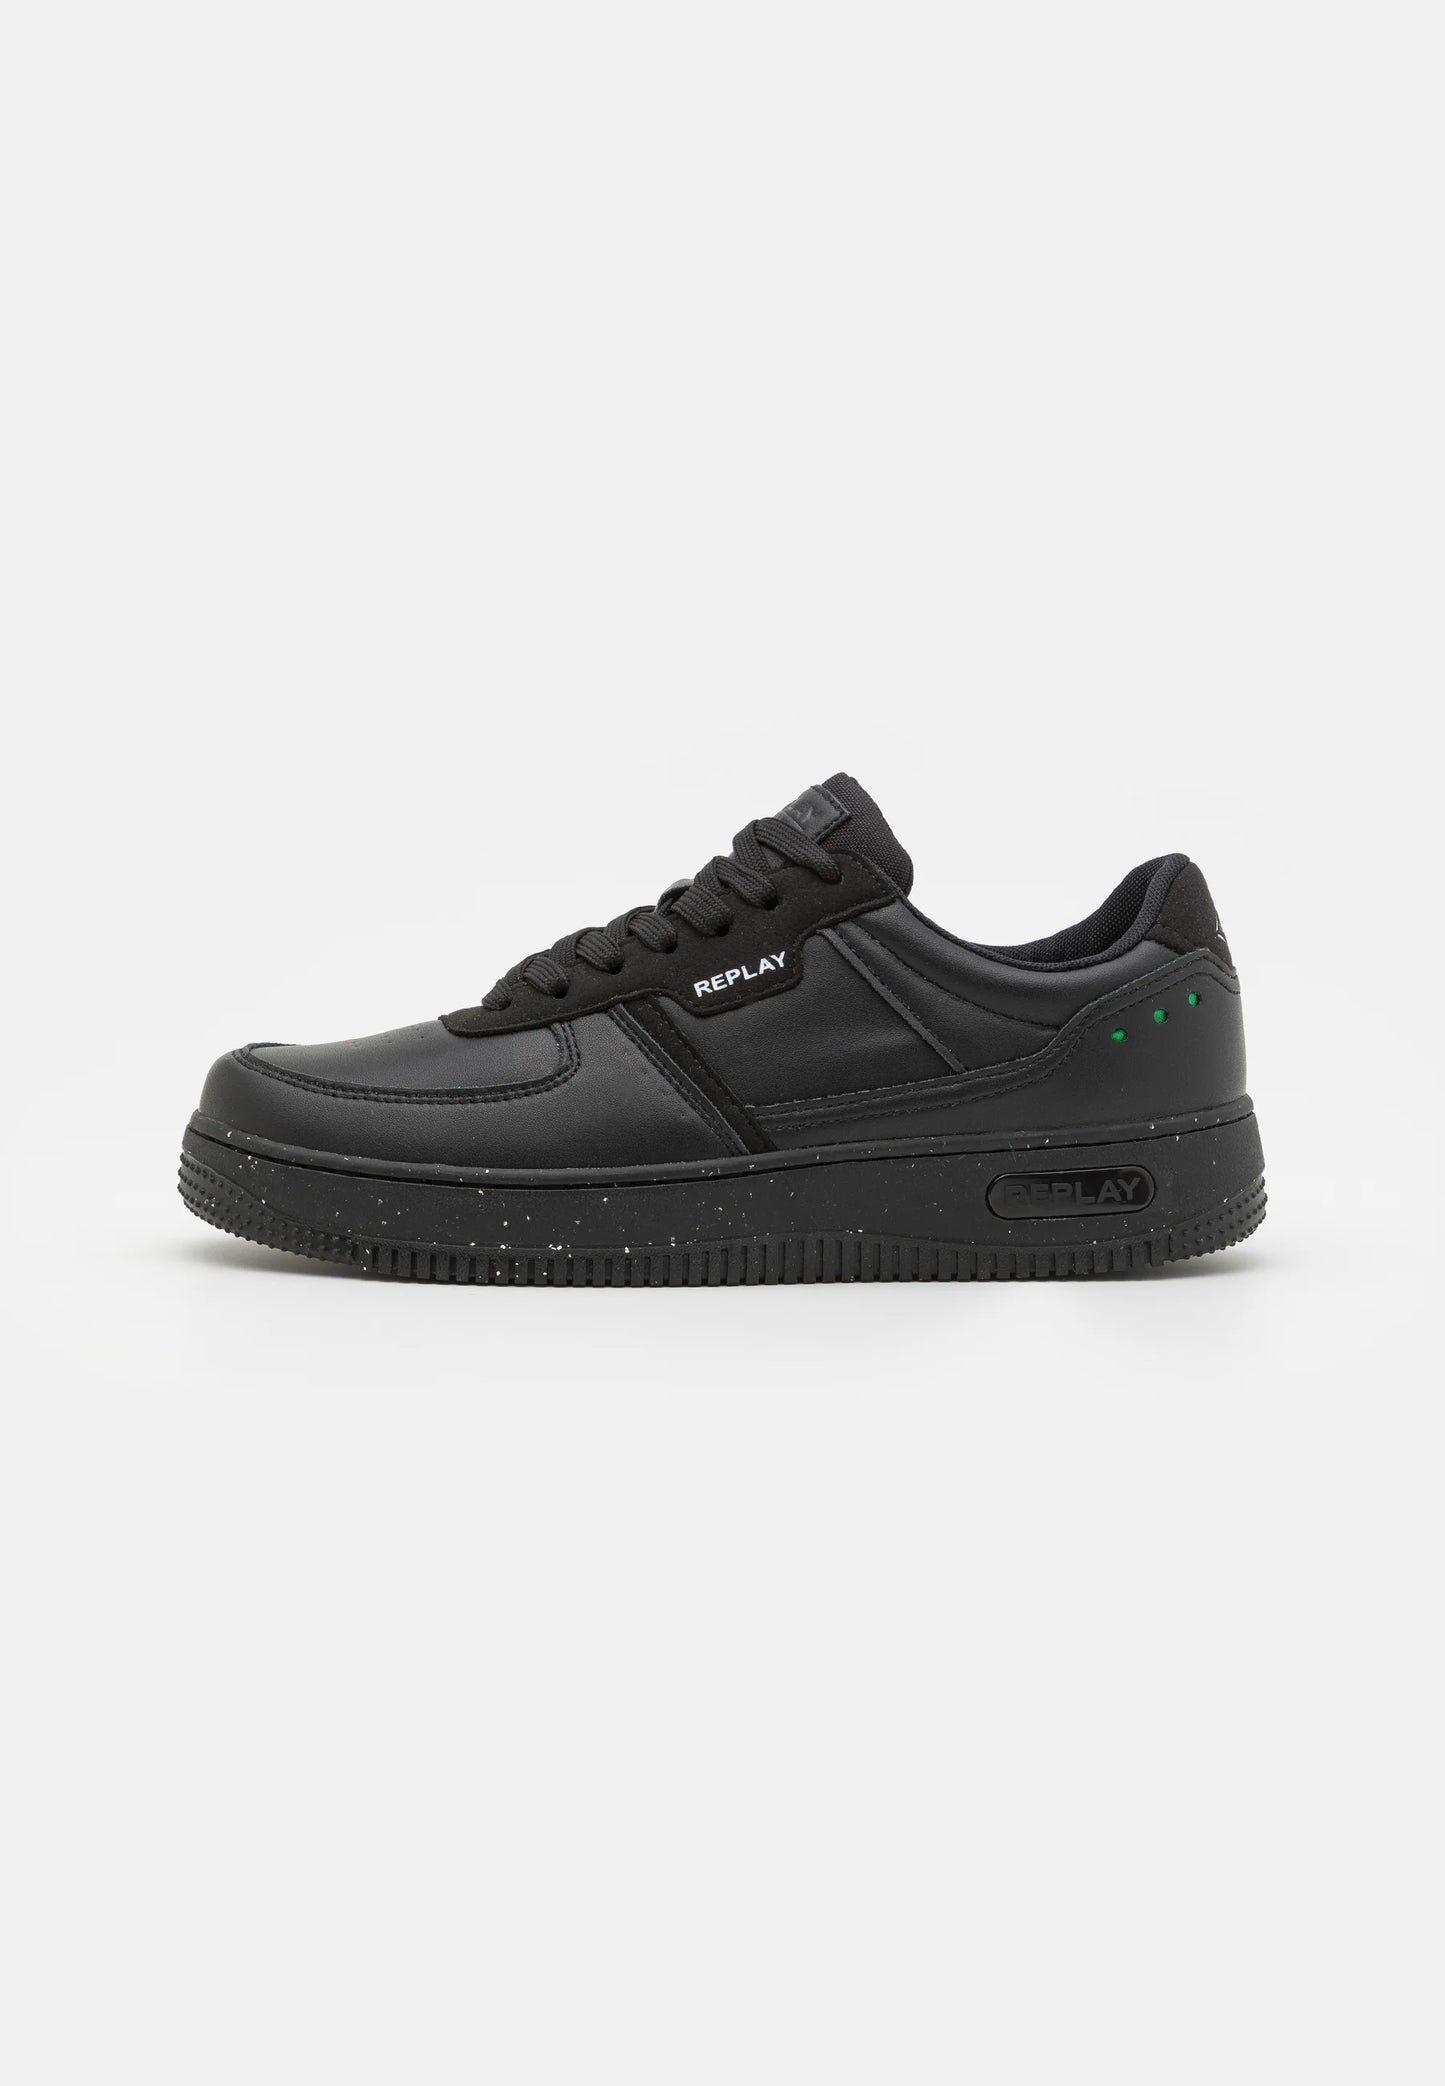 Replay Epic M Green Trainer